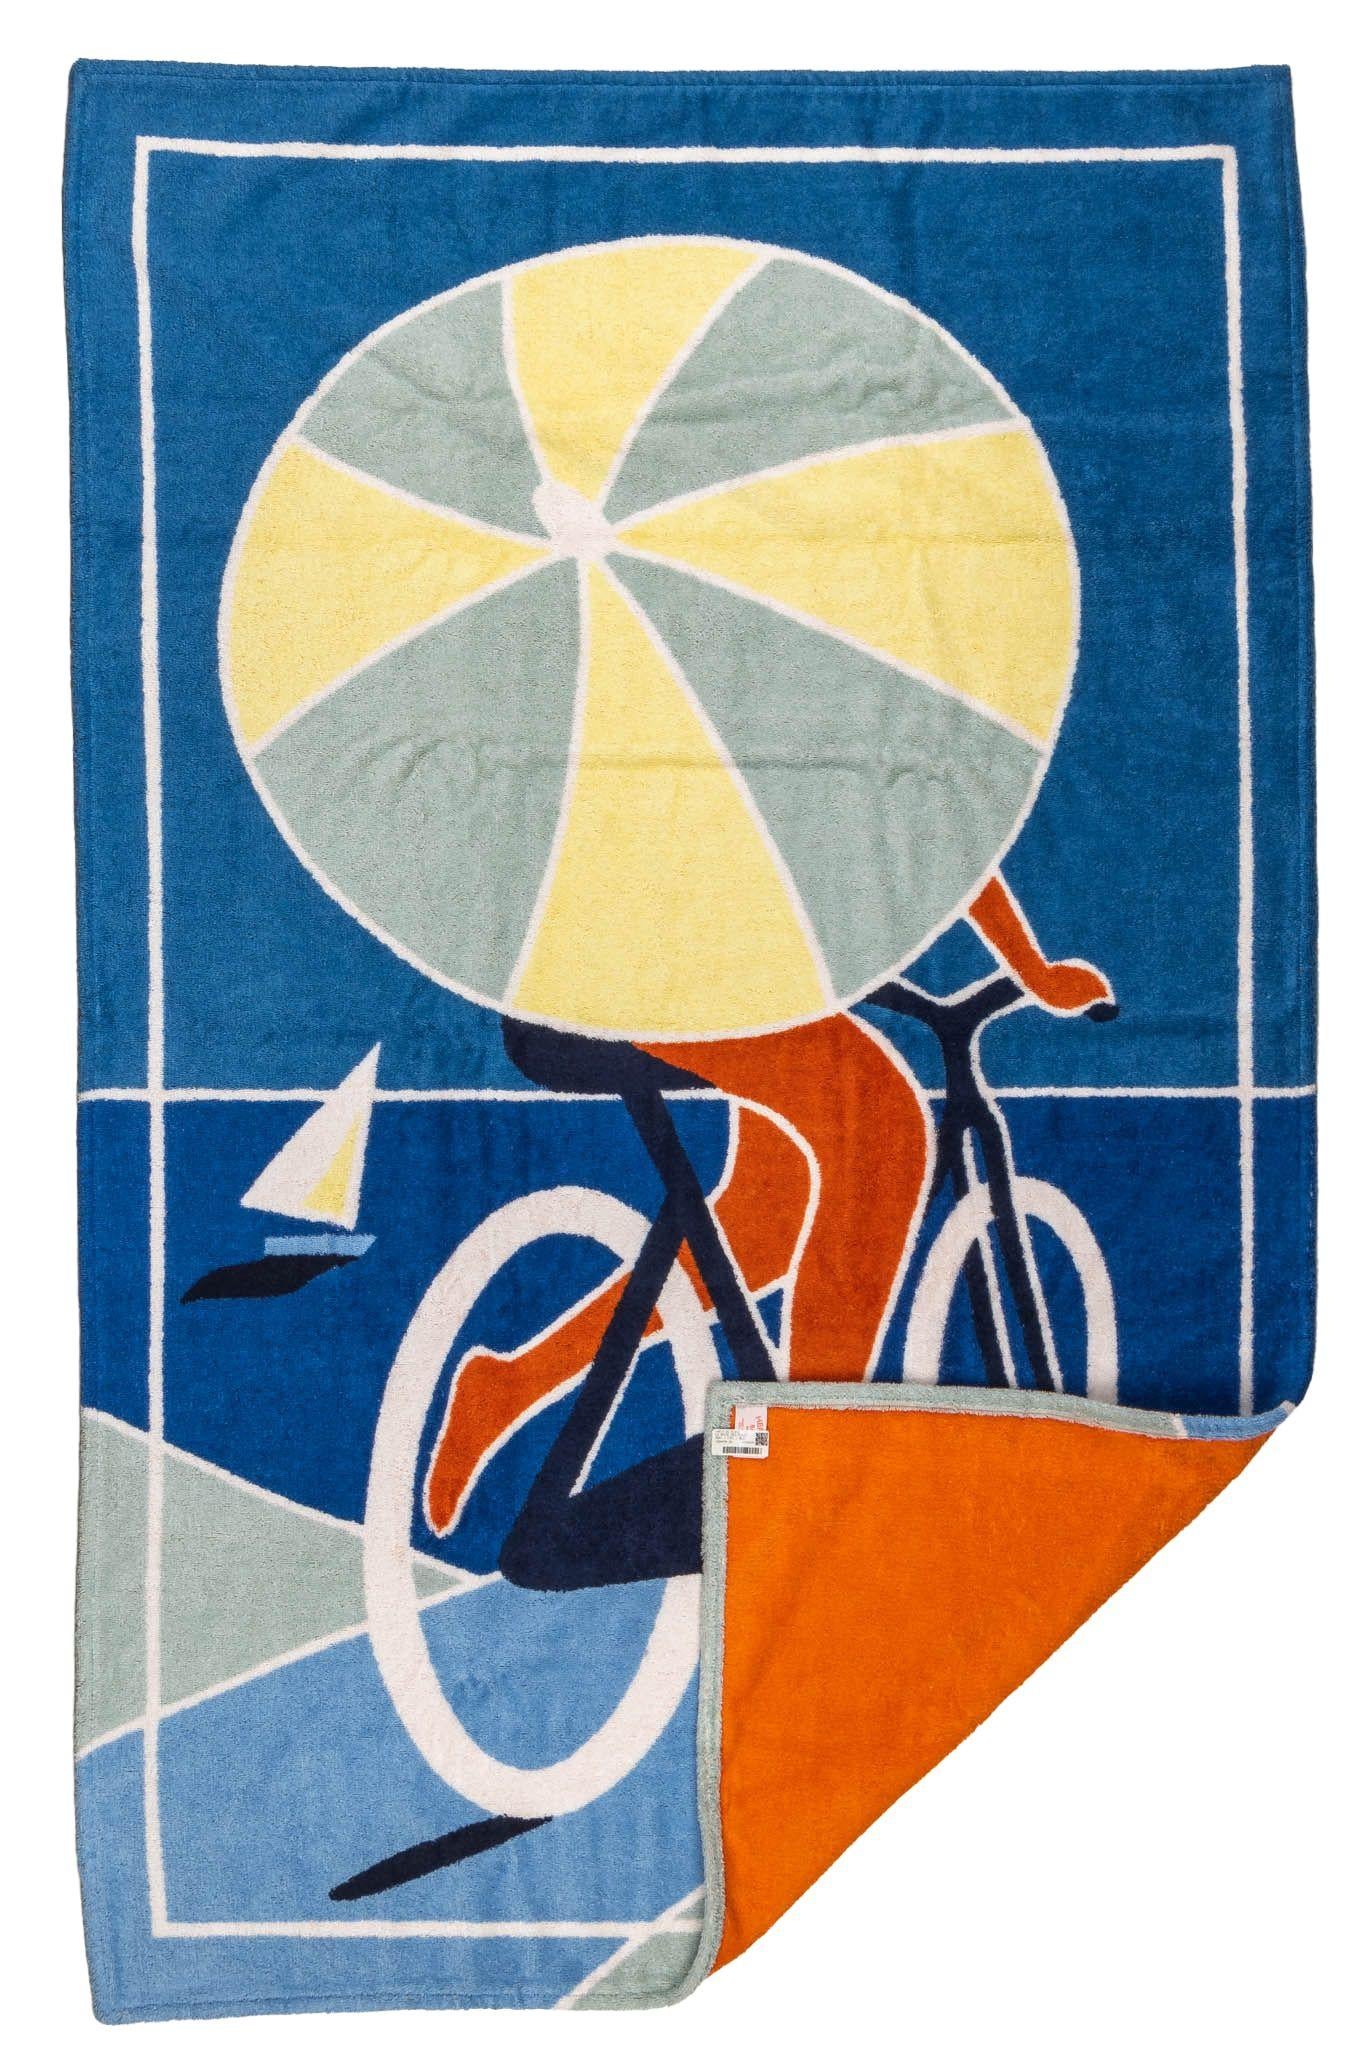 Hermès new cotton beach towel in blue color way with bicycle design. Comes with original box.